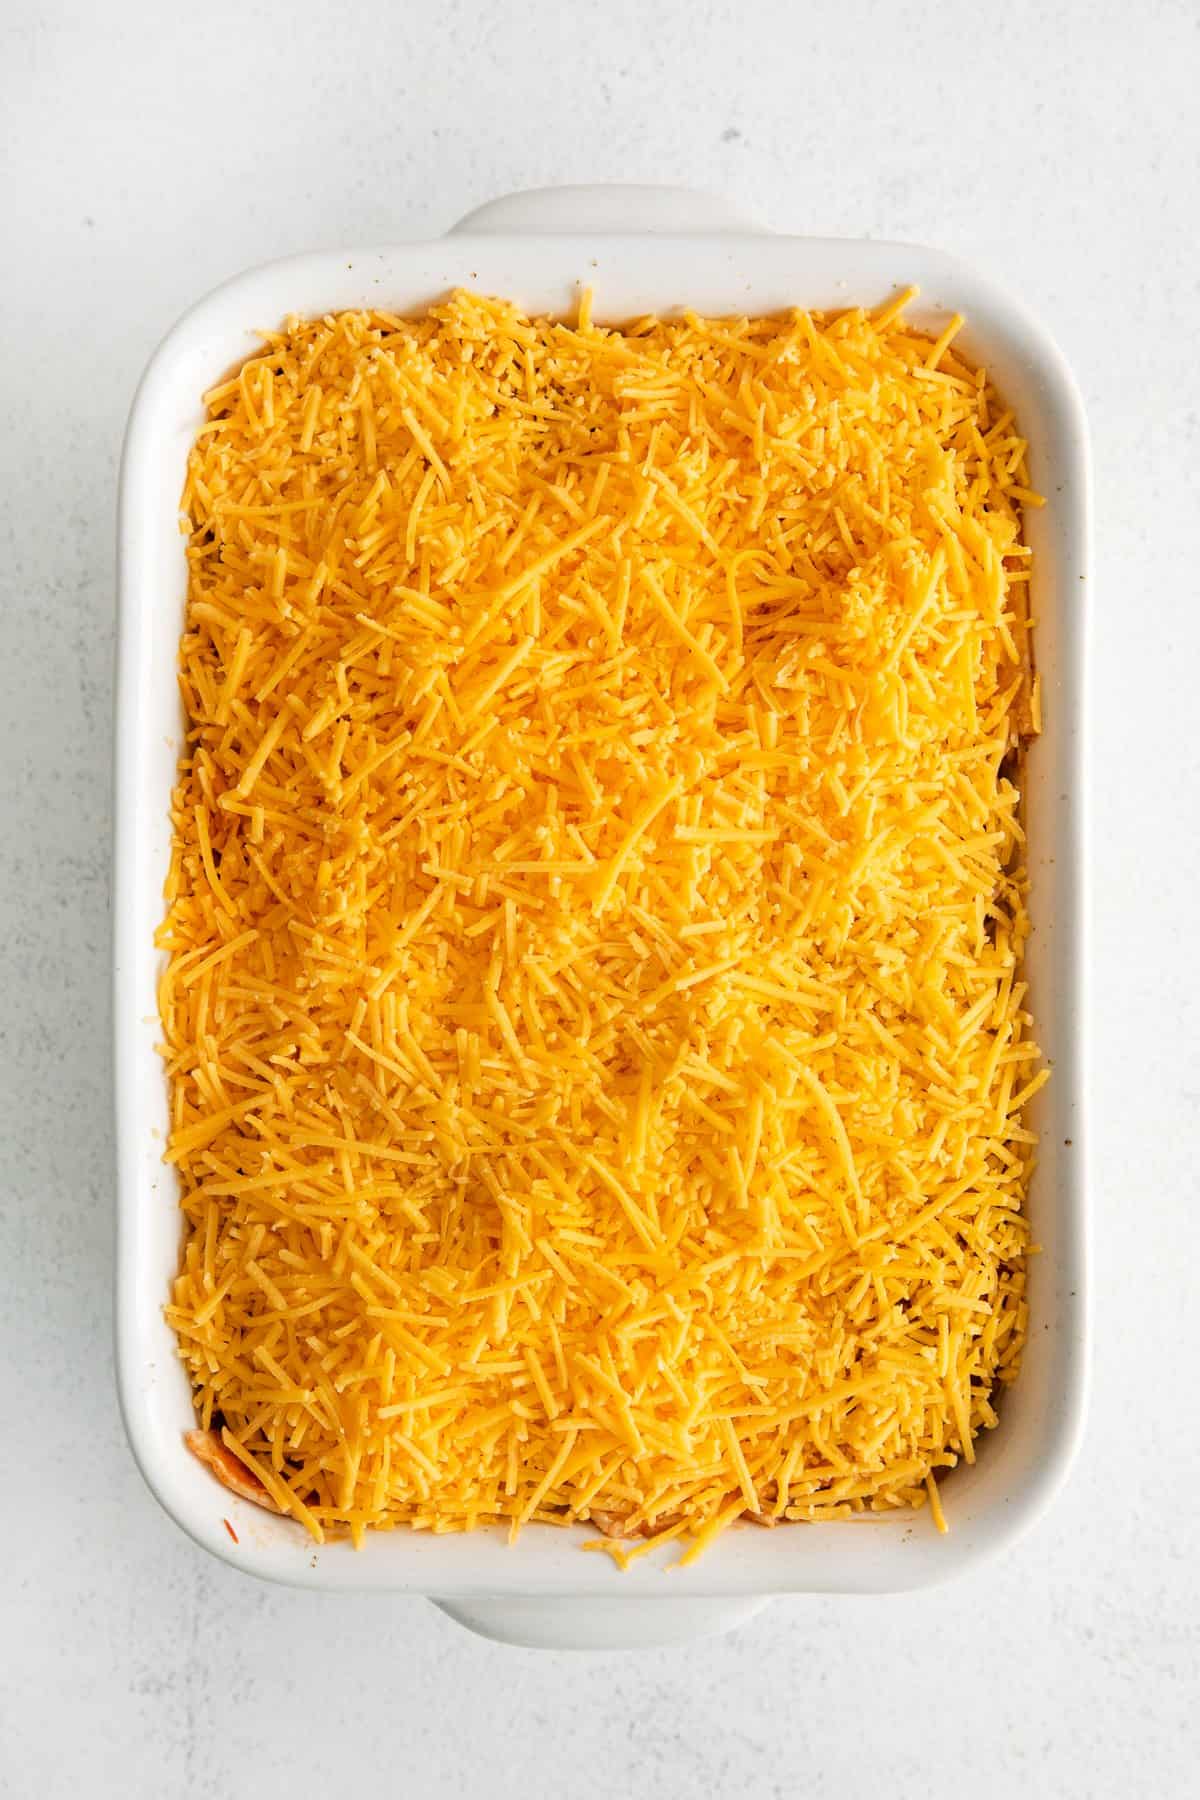 Taco bake in a casserole dish topped with shredded cheddar cheese.